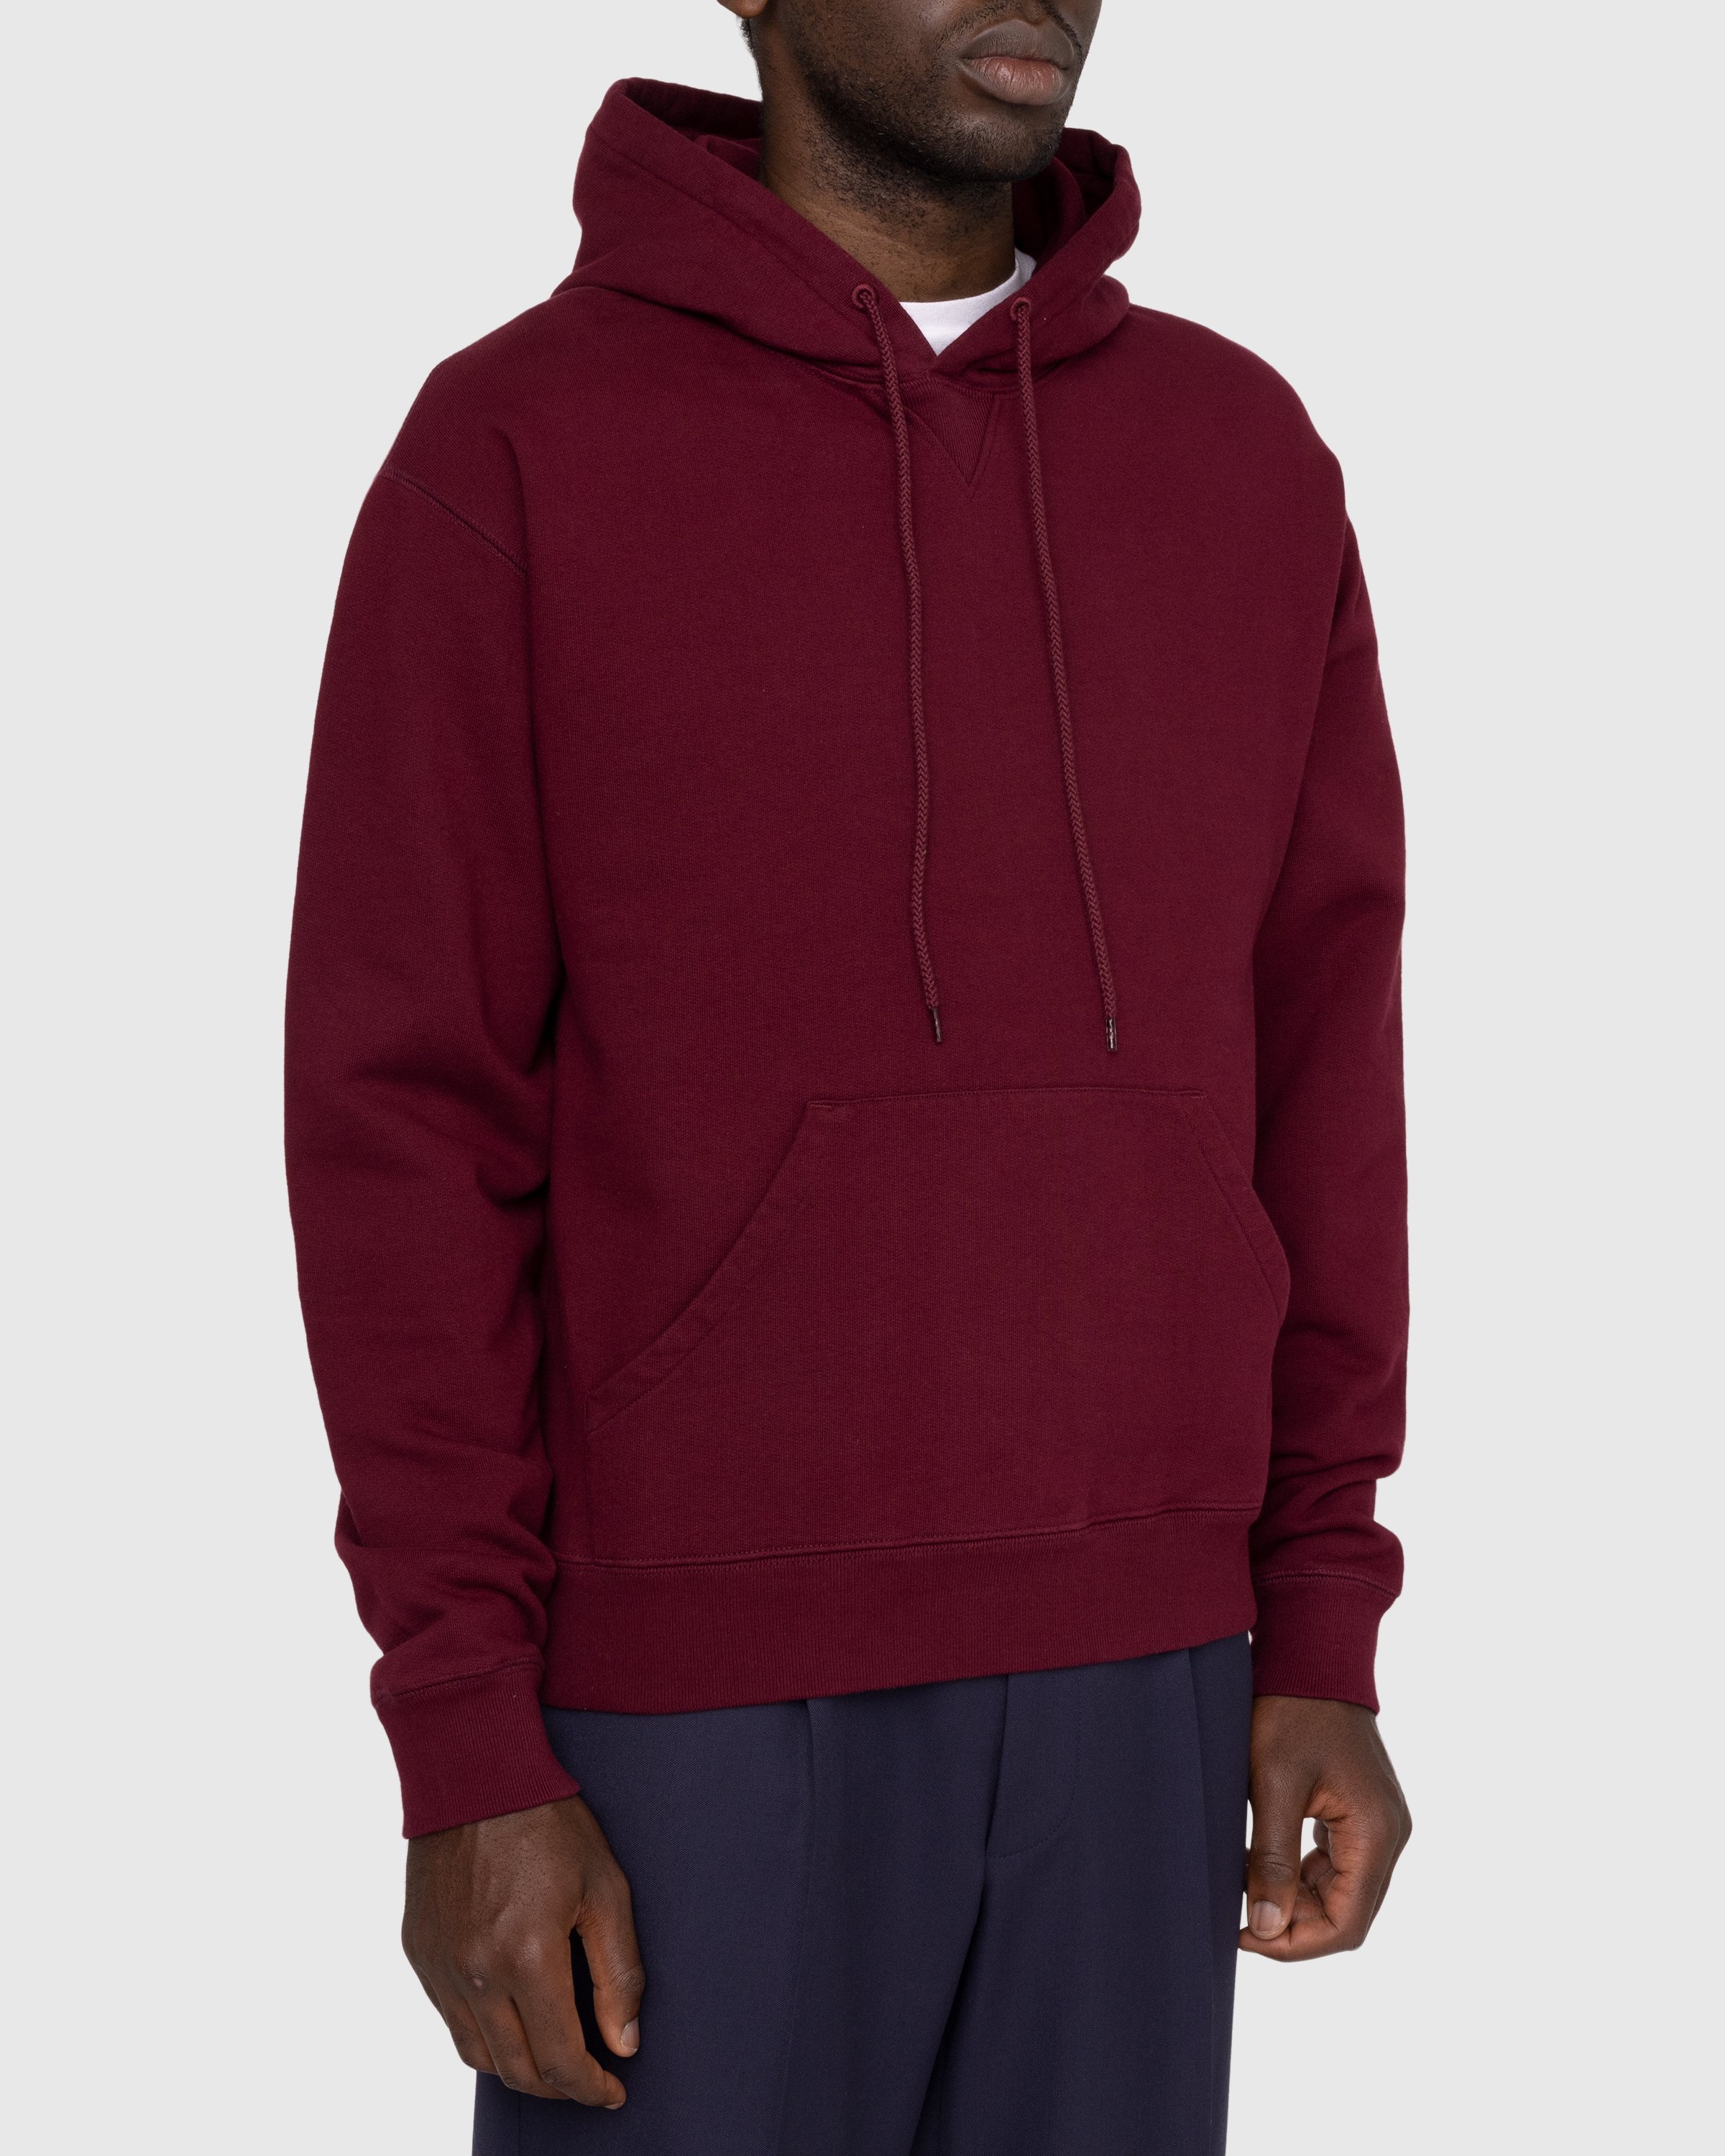 Highsnobiety - Classic Fleece Hoodie Bordeaux - Clothing - Red - Image 3